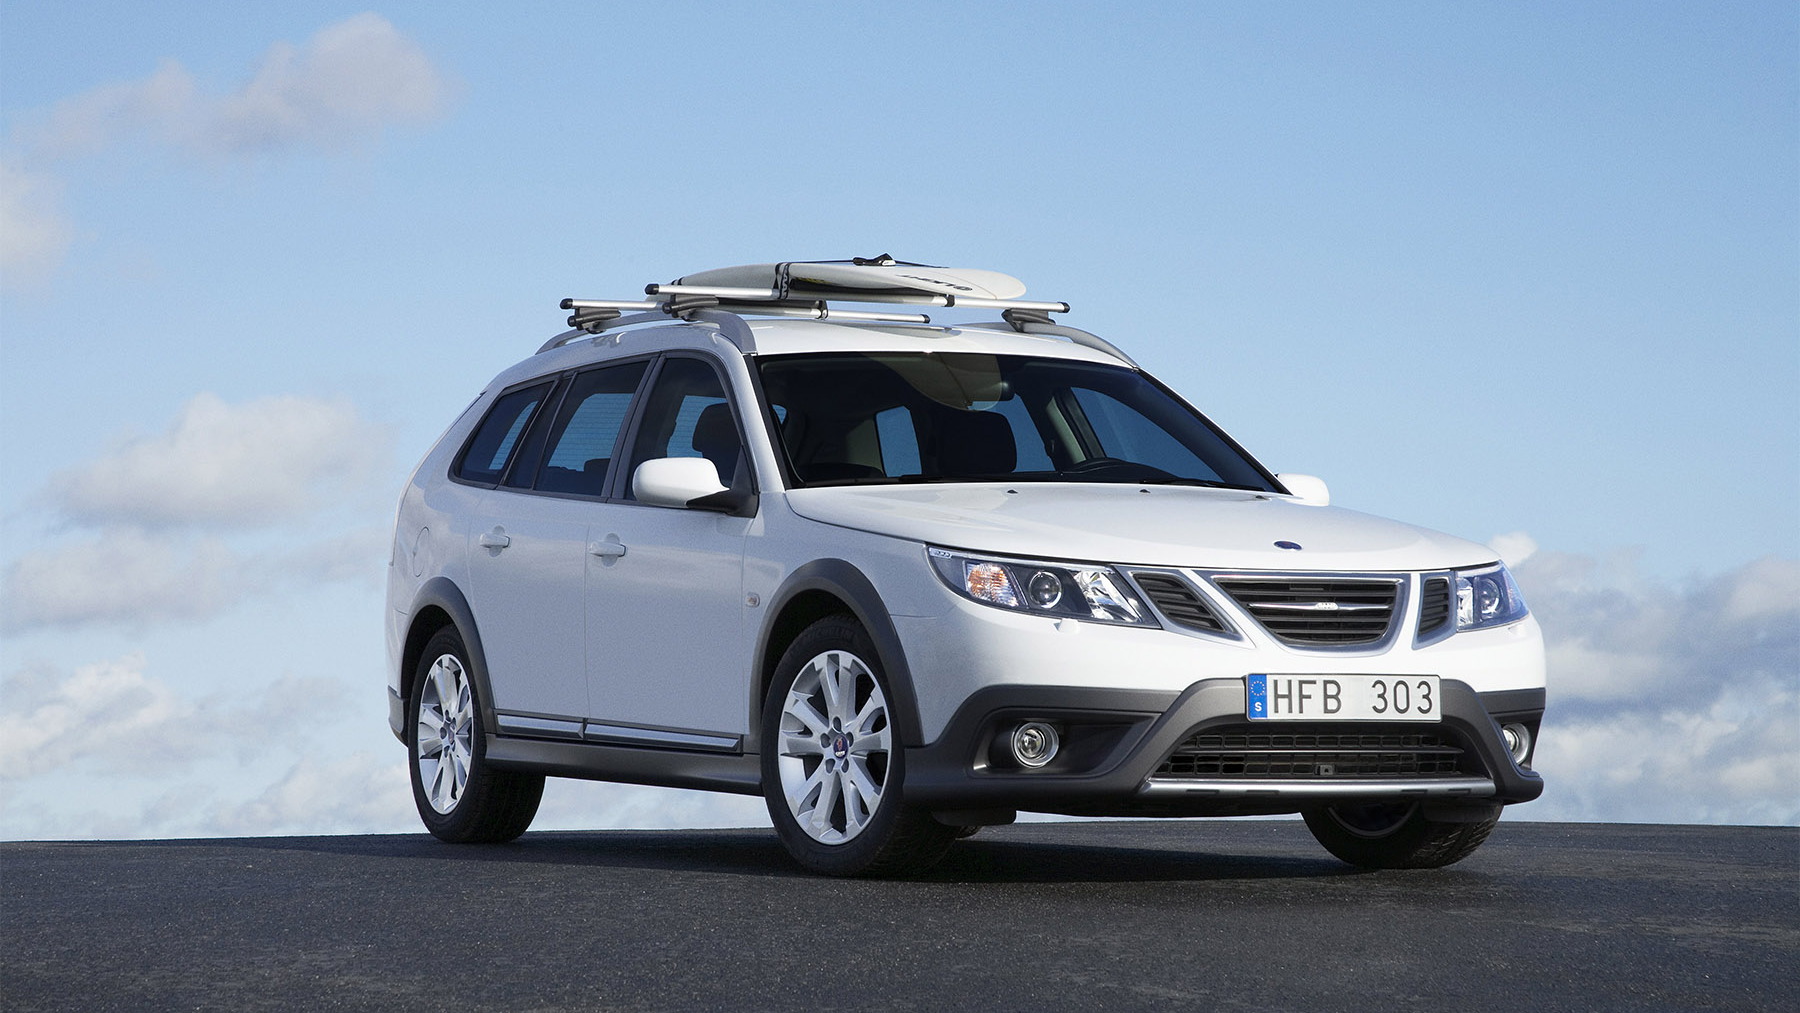 2010 SAAB 9-3 Pricing Revealed, 9-3X Starts From $37,800